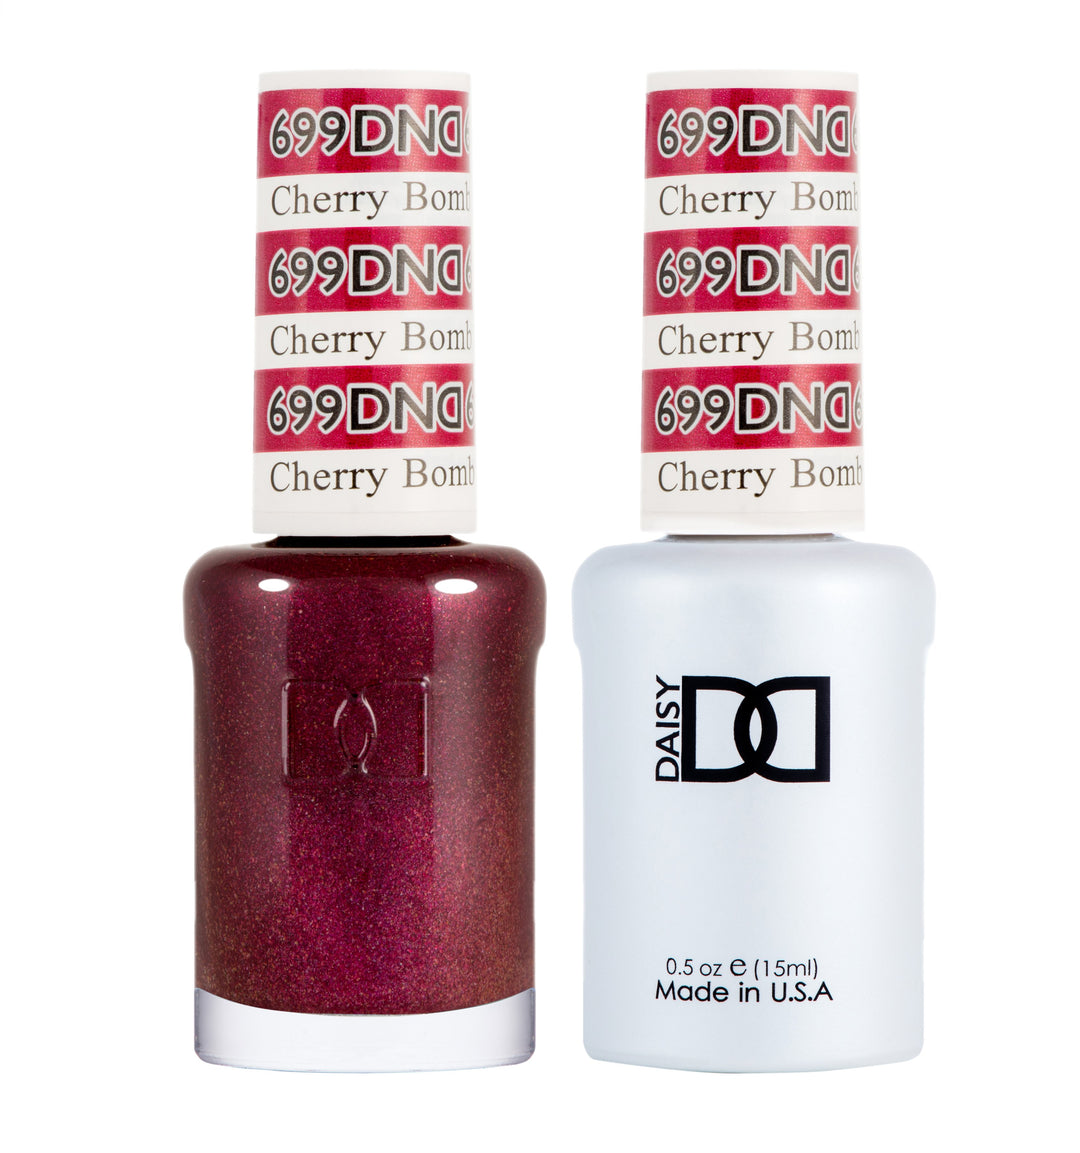 DND DUO Nail Lacquer and UV|LED Gel Polish Cherry Bomb 699 (2 x 15ml)